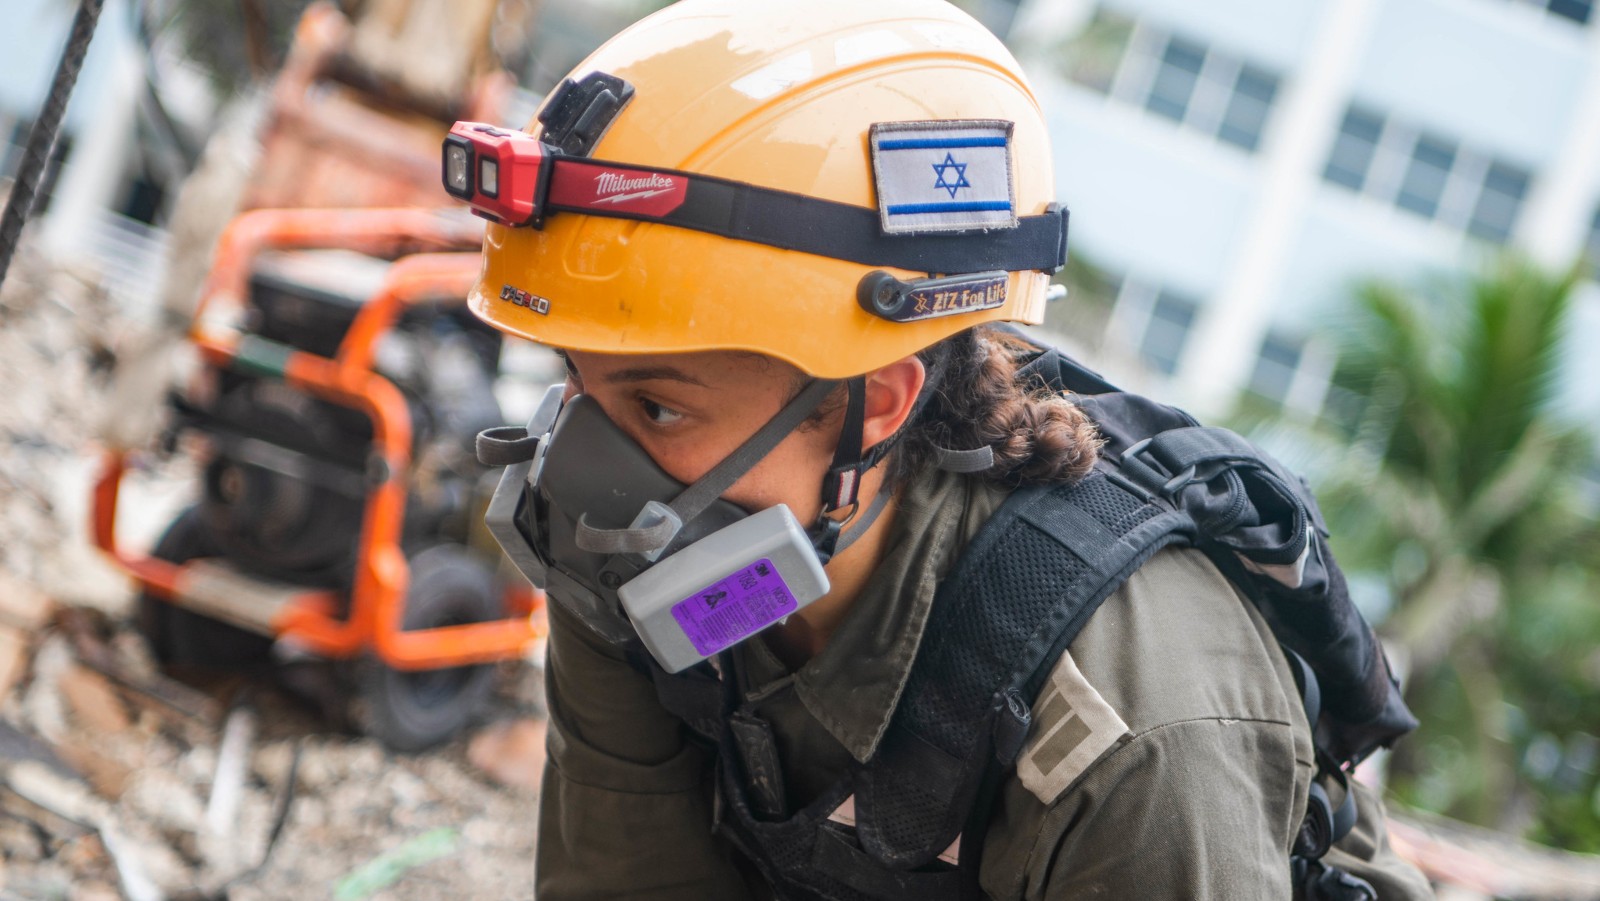 An IDF Home Front Command mission member searching for survivors in Surfside, Florida, June 2021. Photo courtesy of the Israeli Defense Forces Spokesperson's Unit